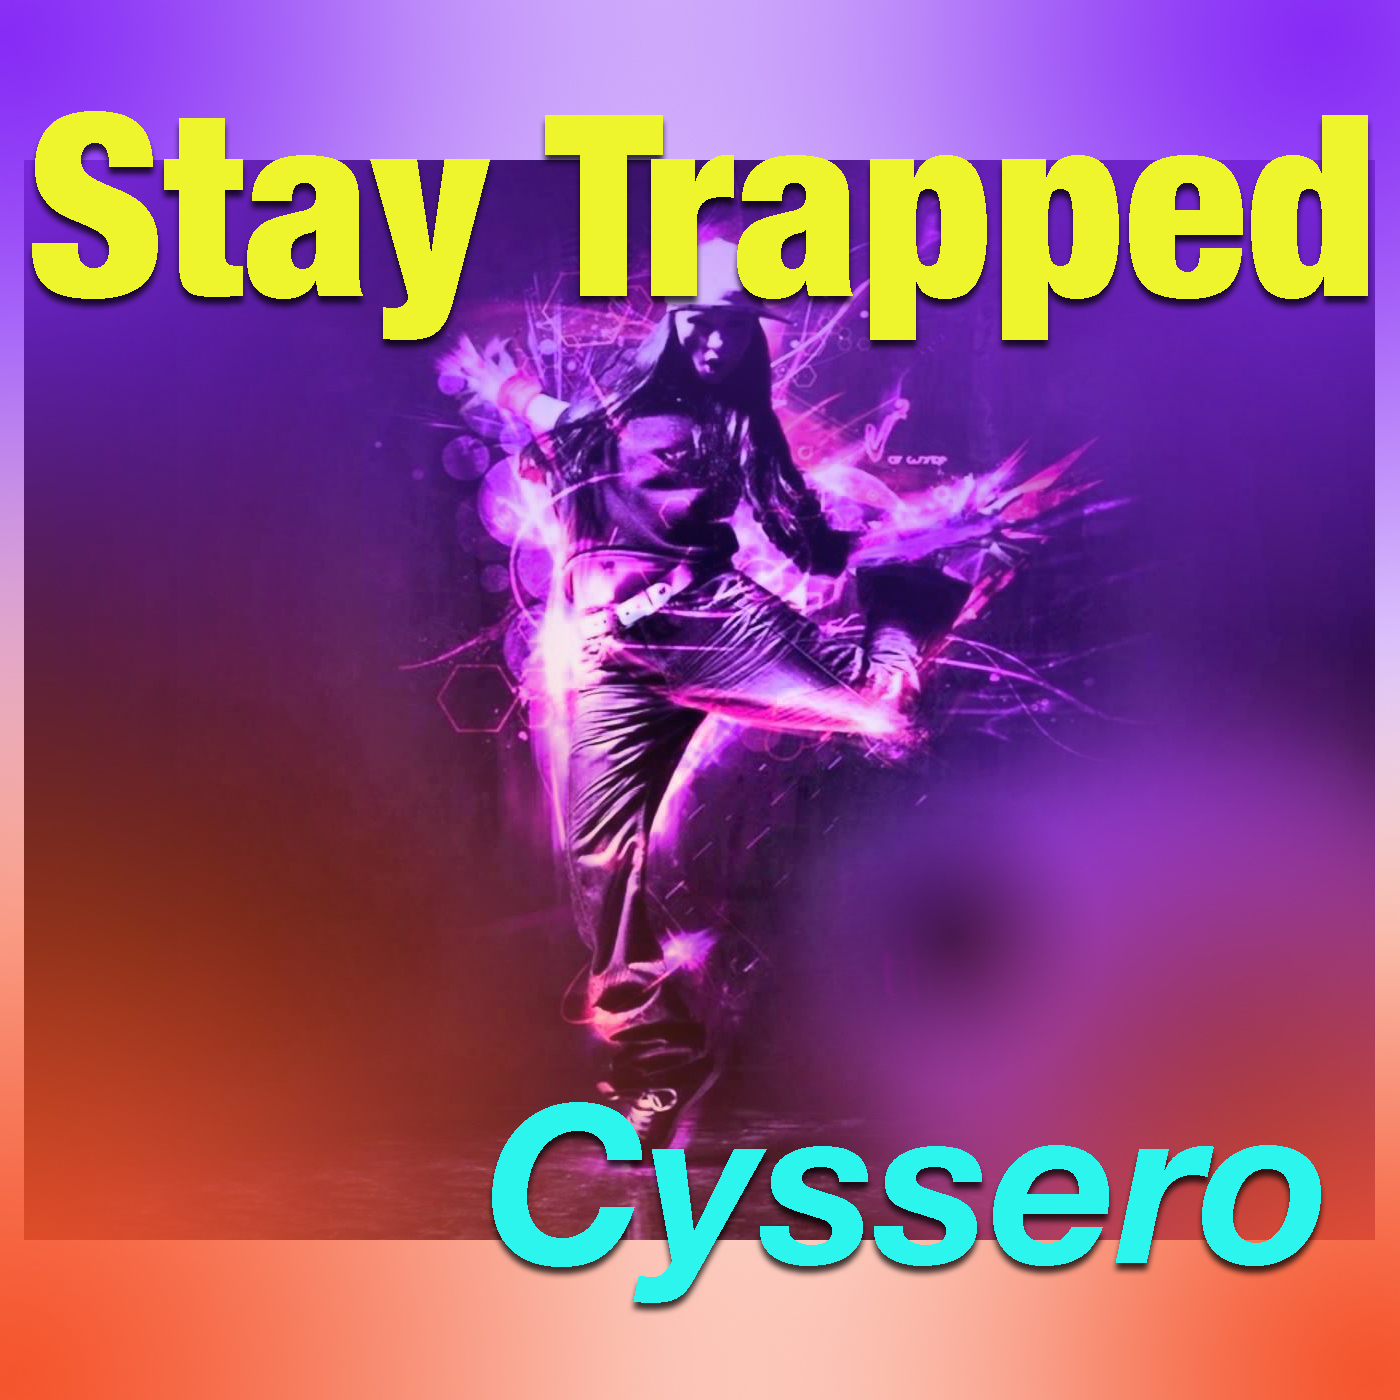 Stay Trapped